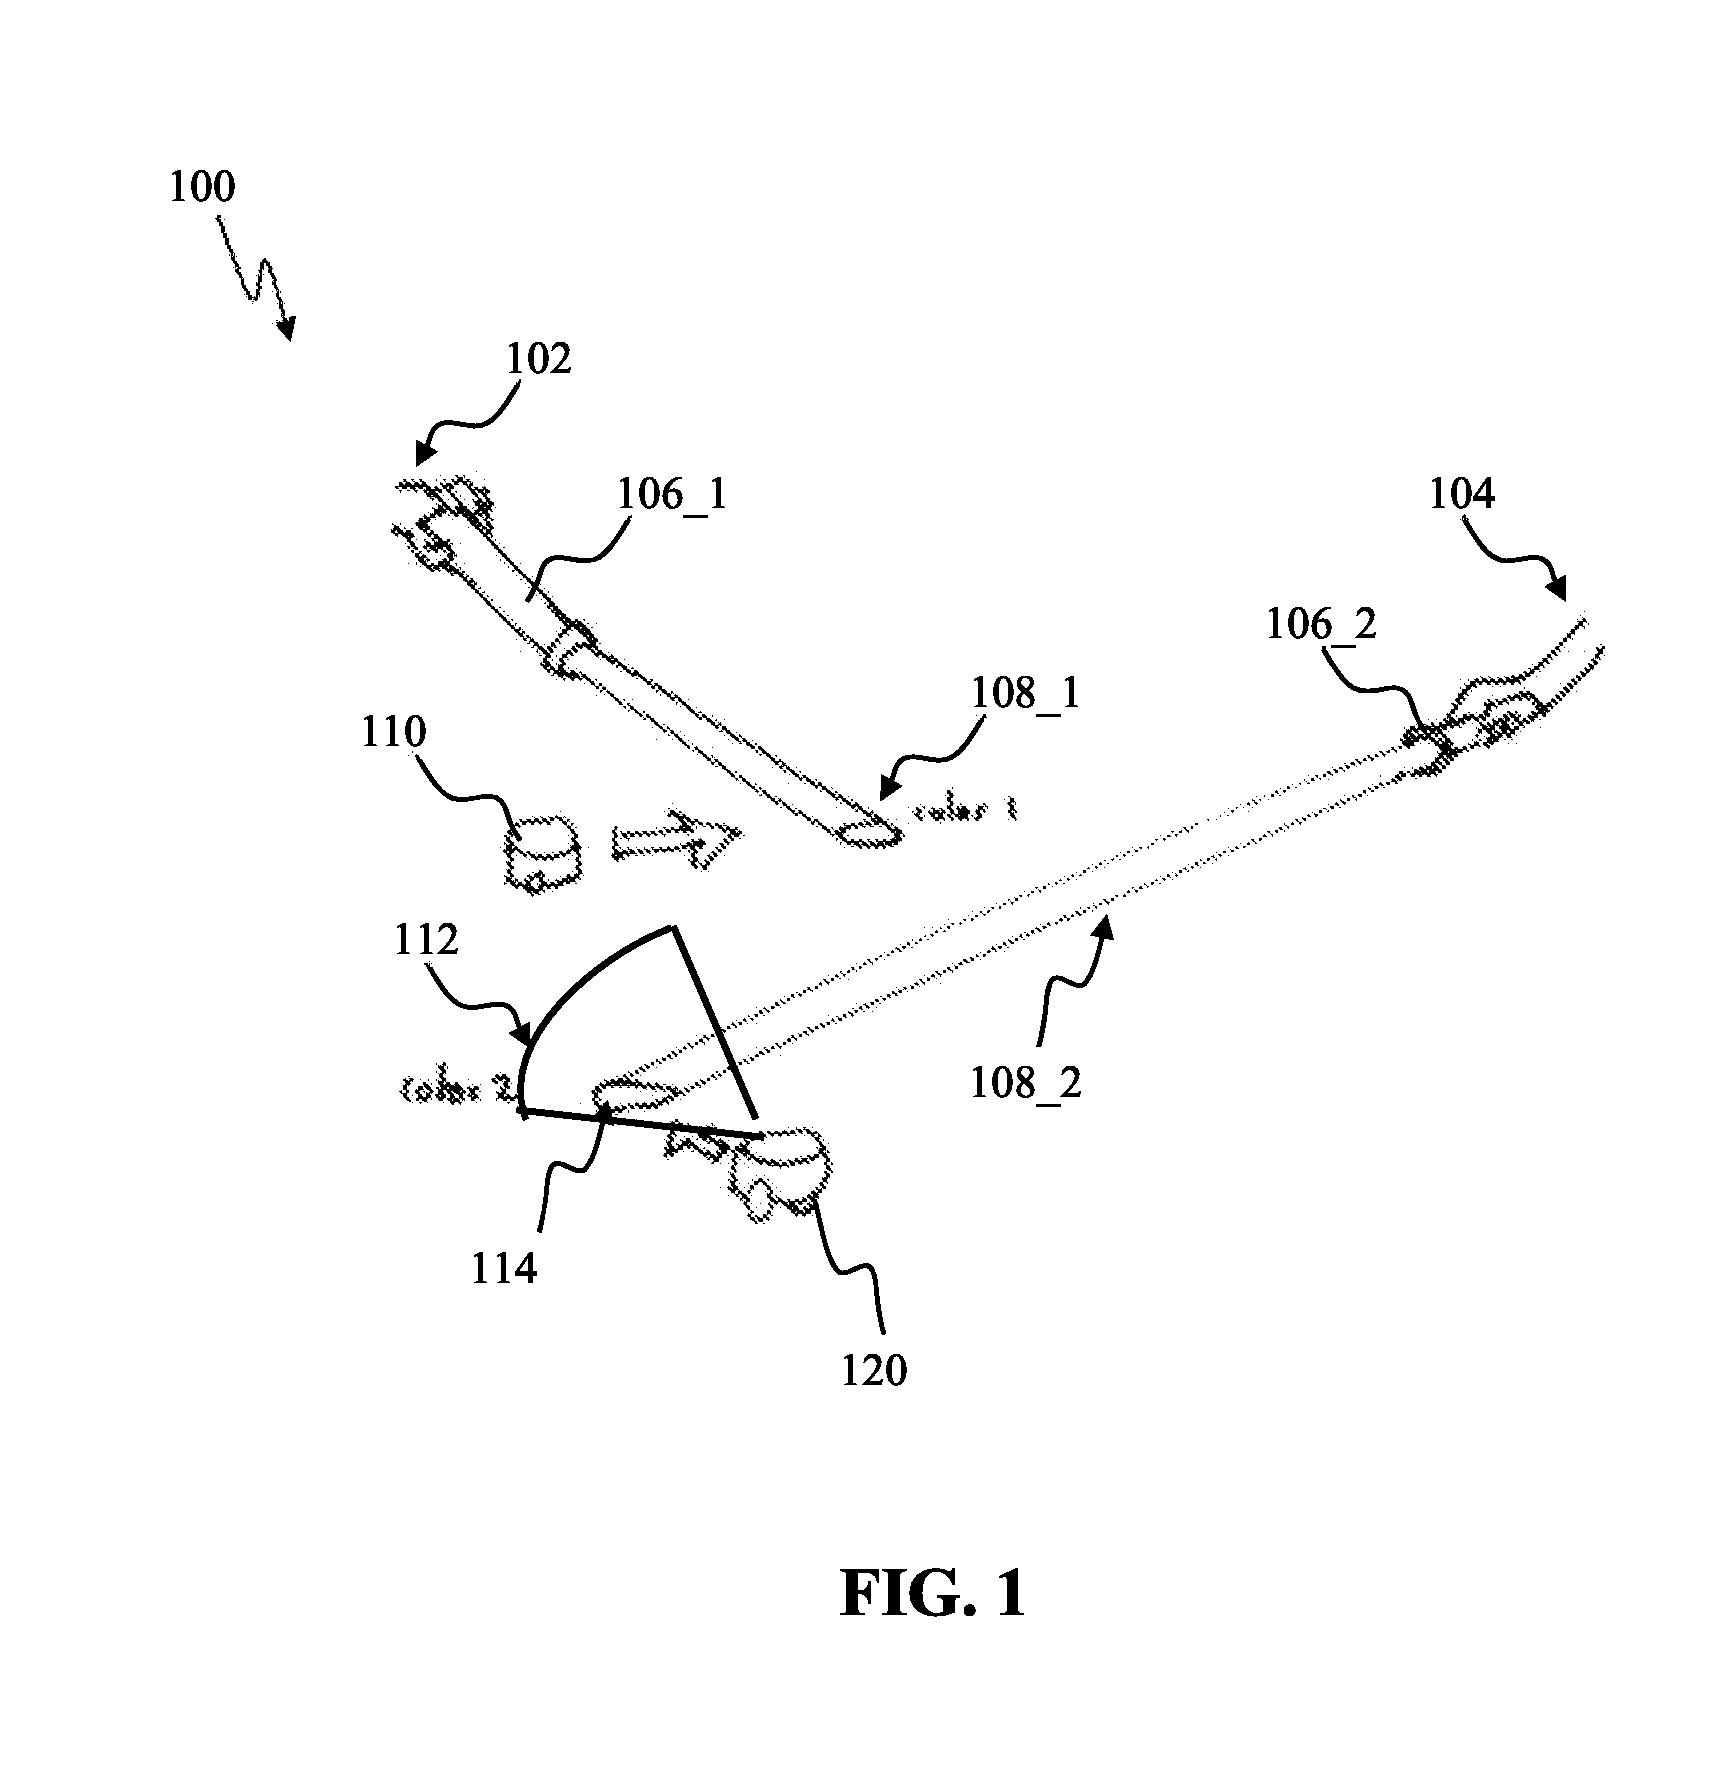 Apparatus and methods for robotic learning